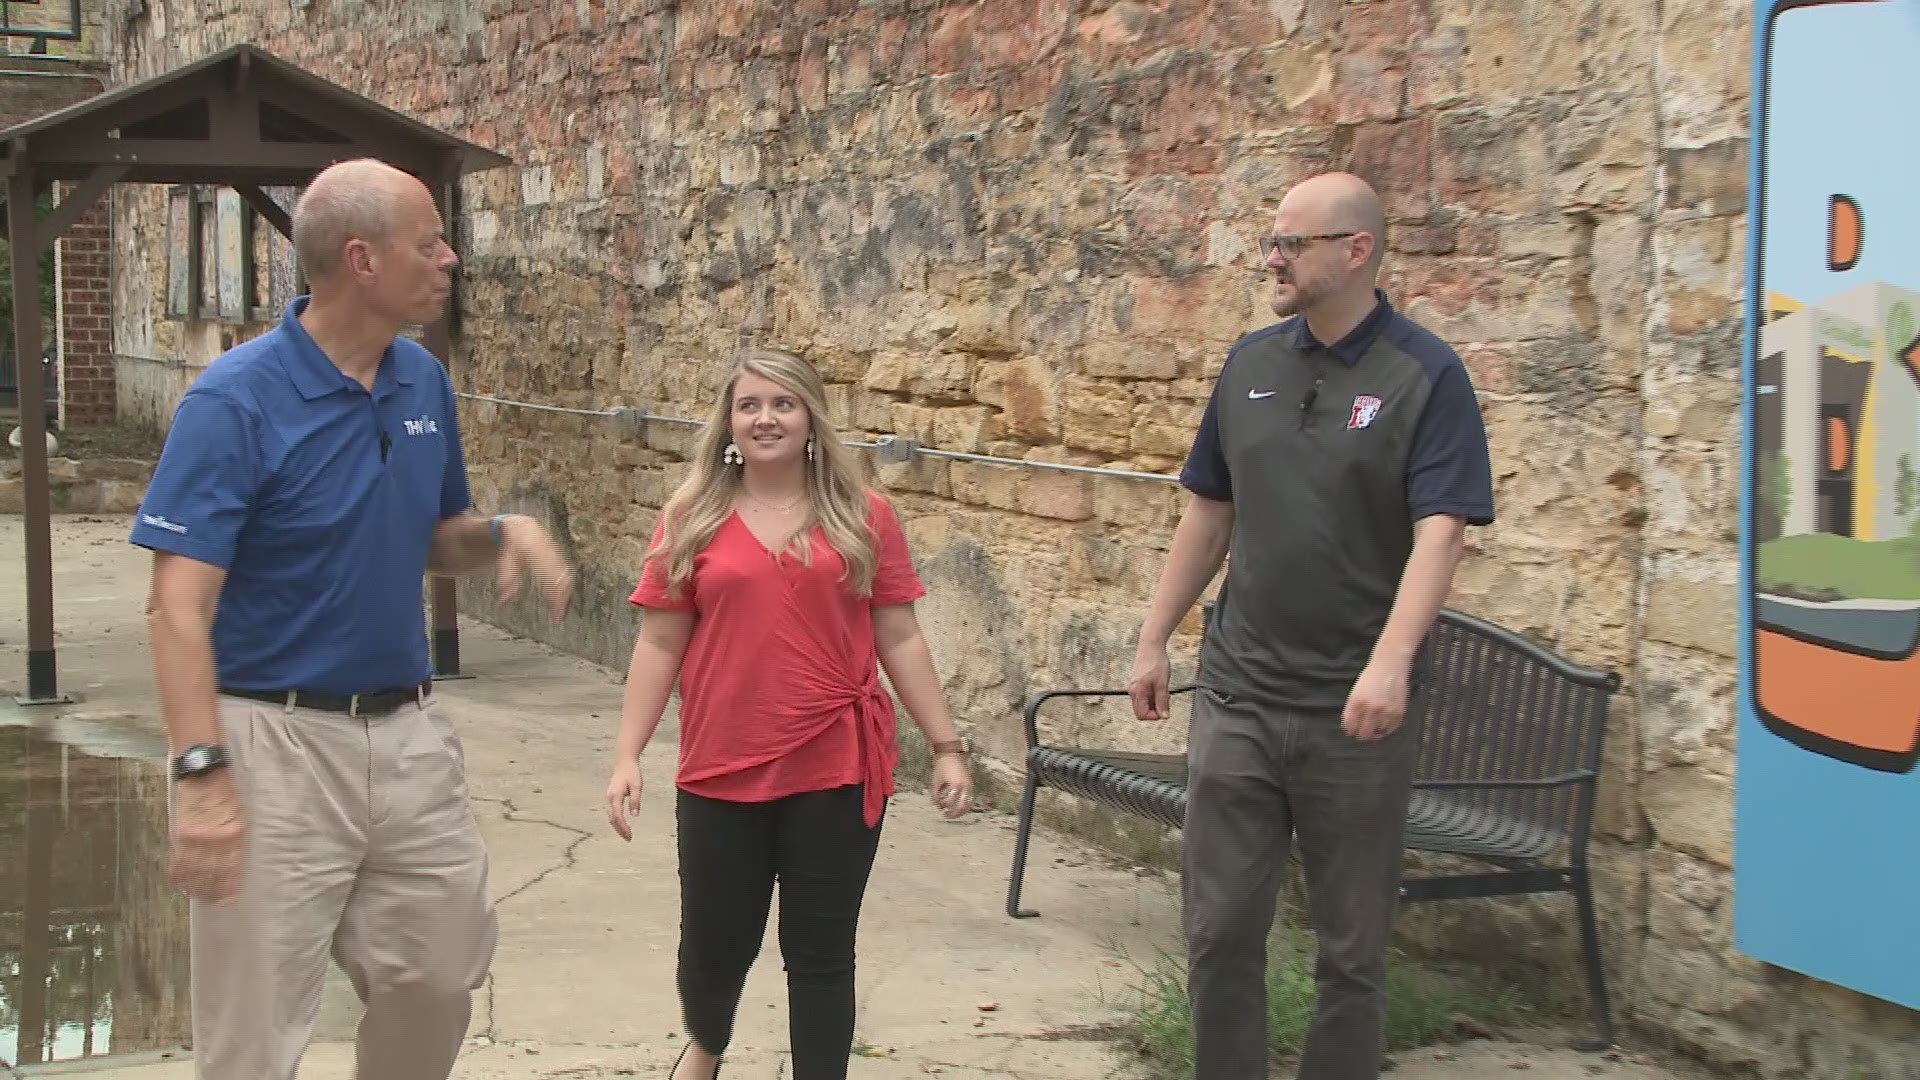 Craig visits Batesville to learn more about how art shapes to small Arkansas town.